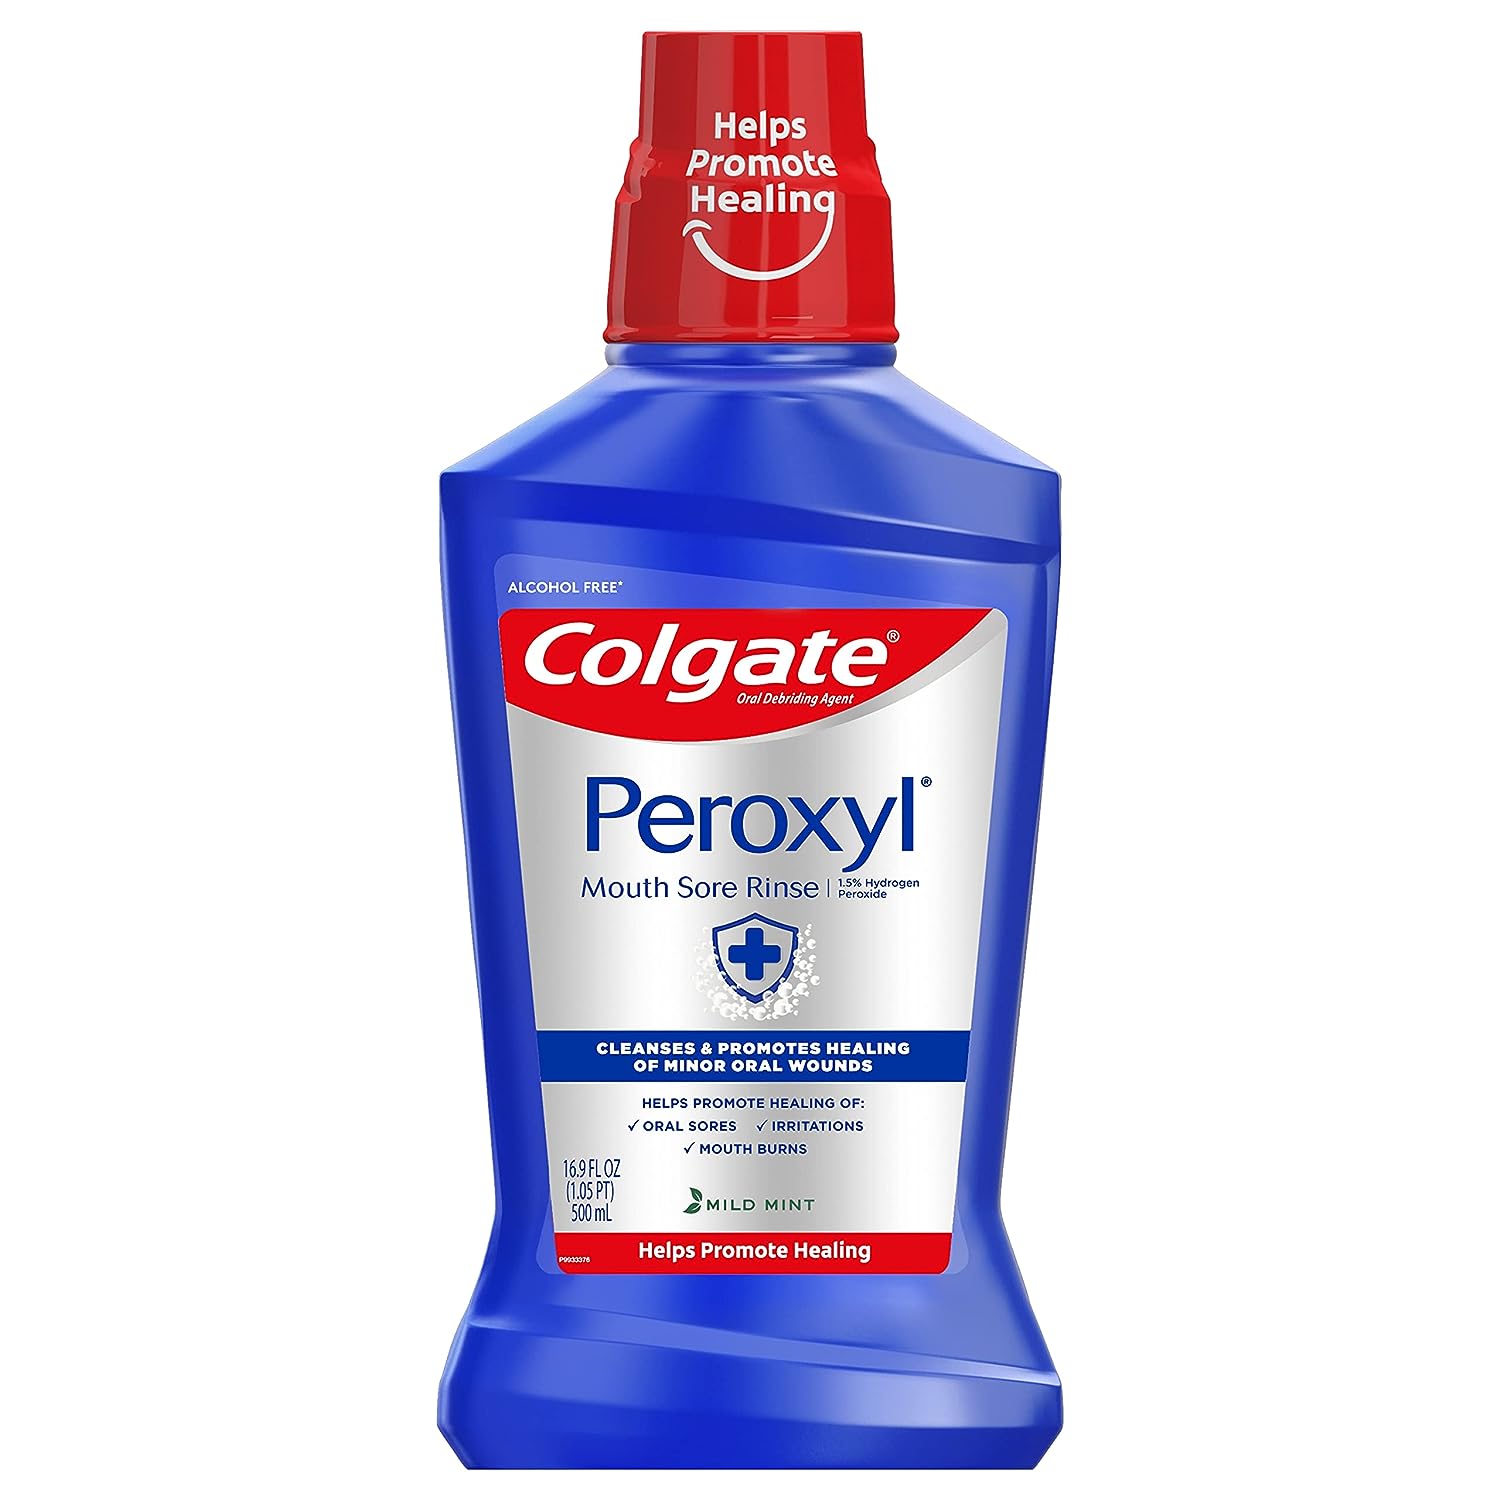 Colgate Peroxyl Antiseptic Mouthwash and Mouth Sore Rinse